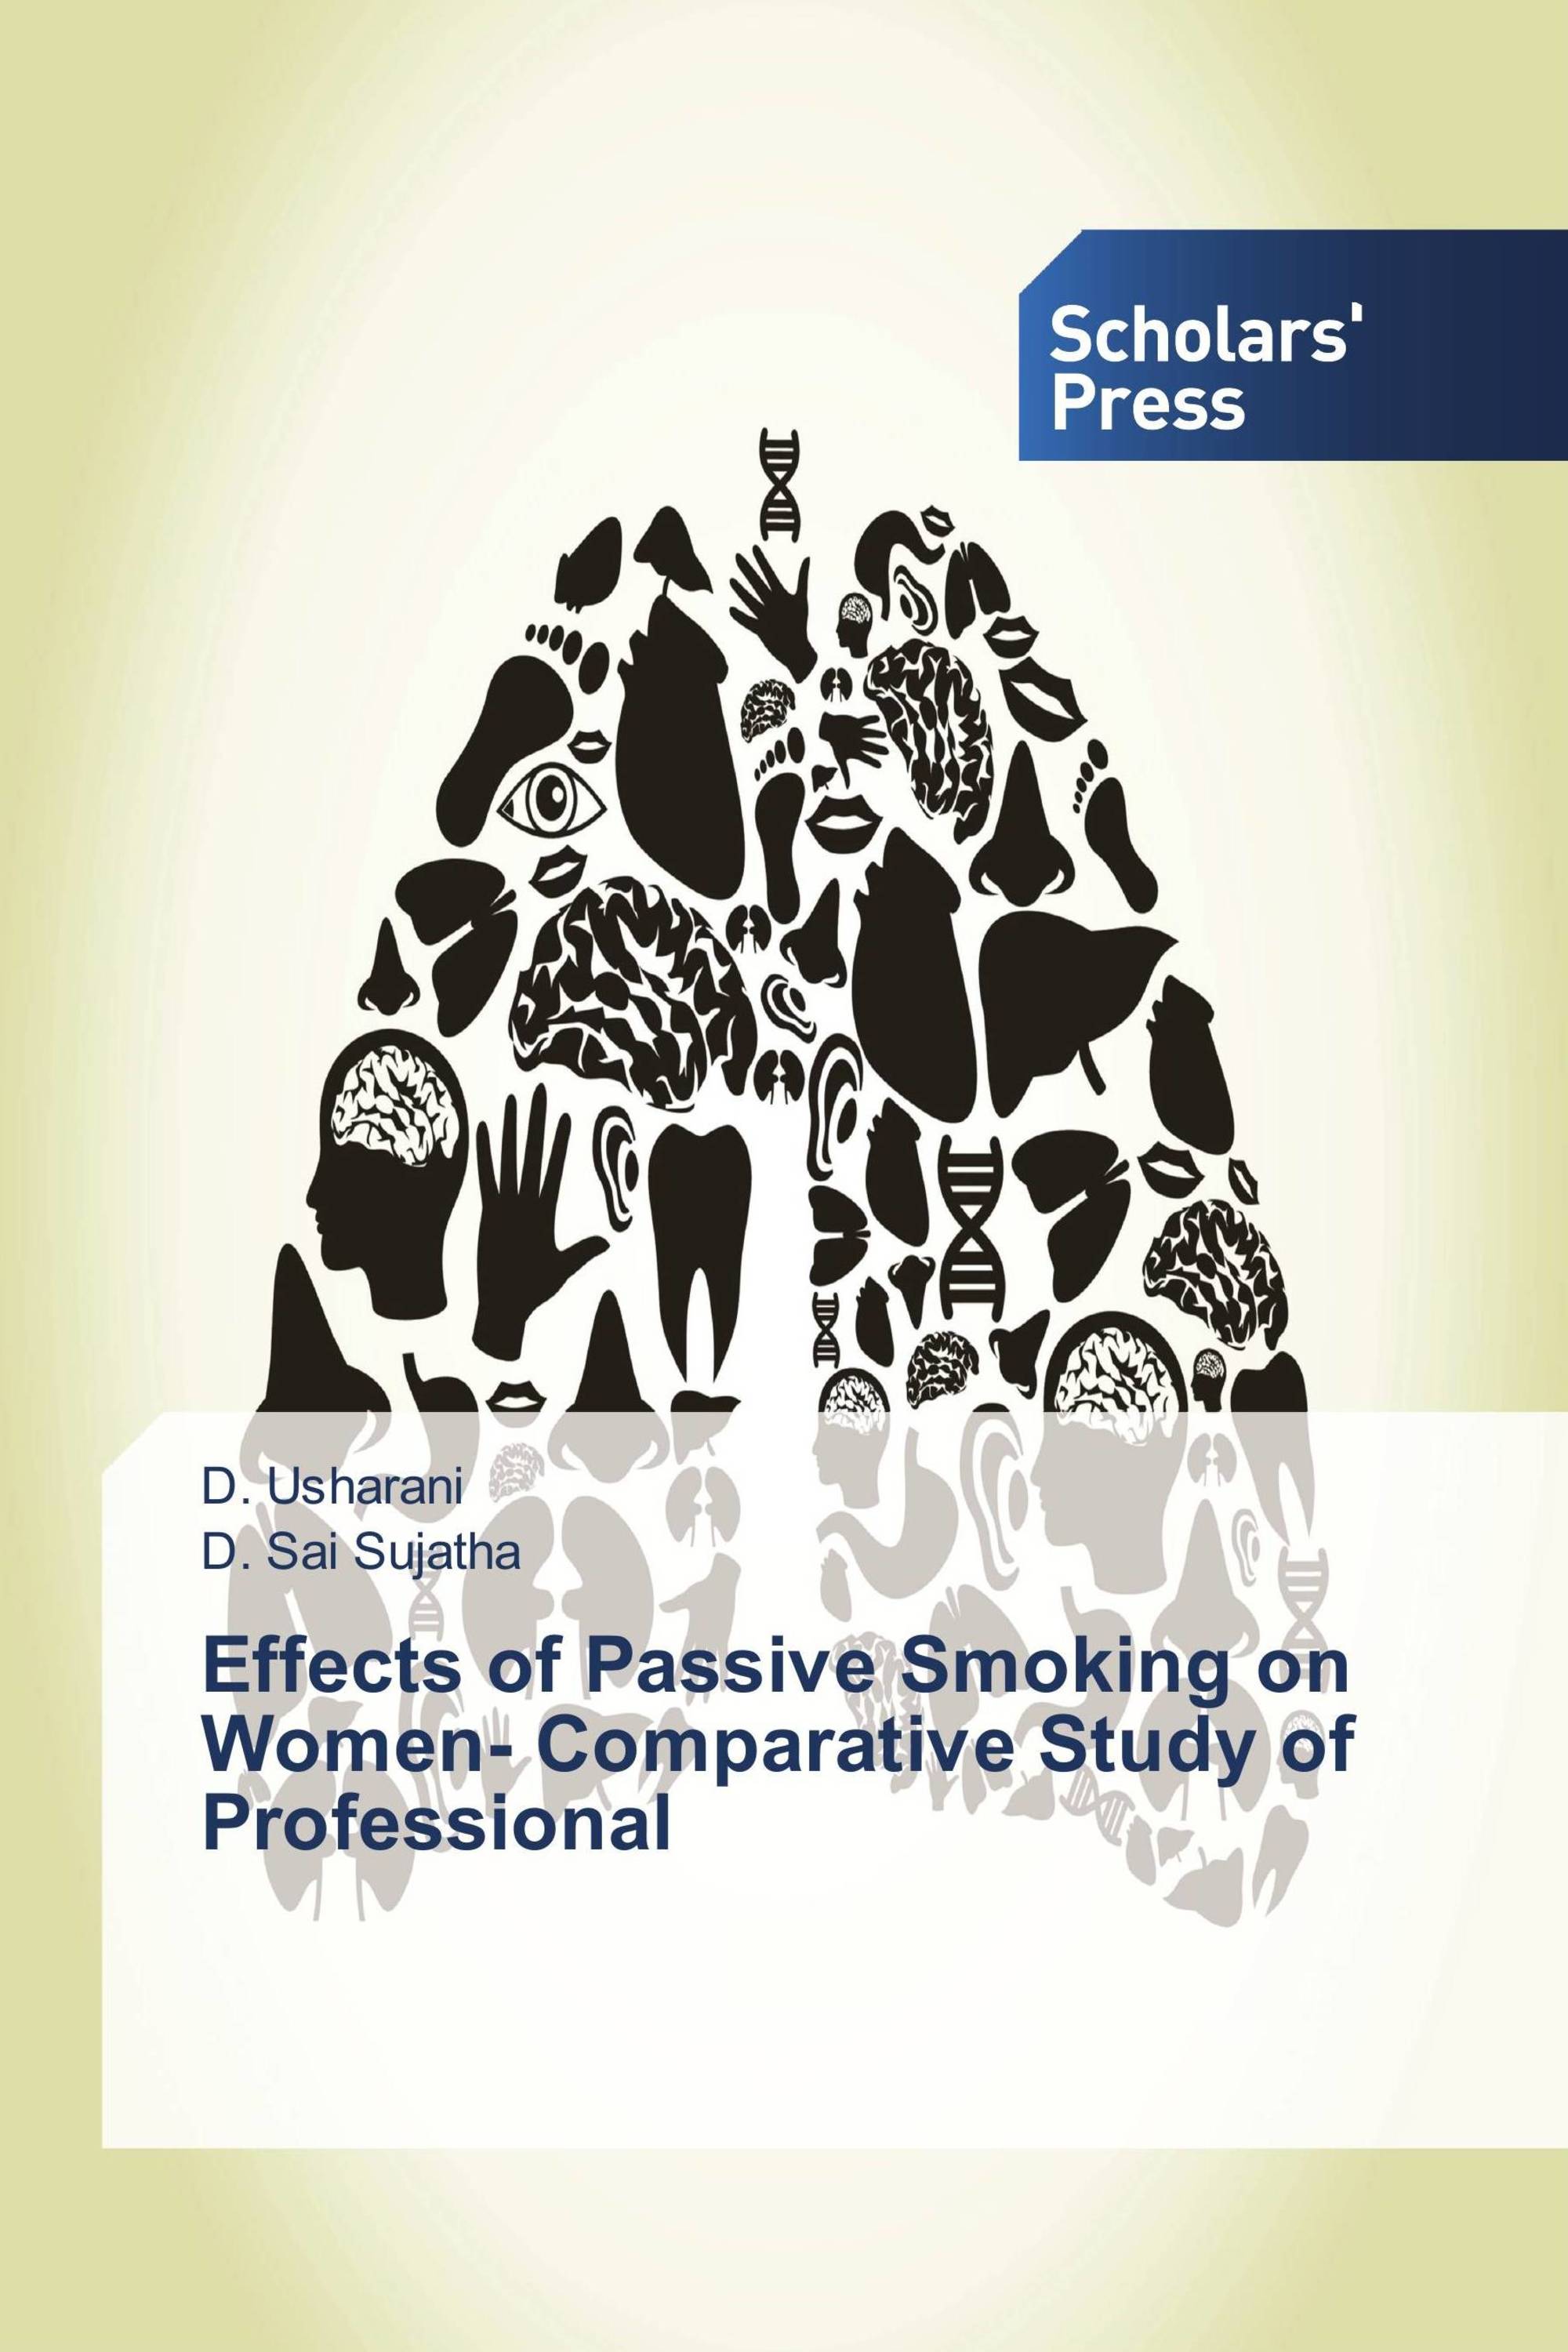 Effects of Passive Smoking on Women- Comparative Study of Professional